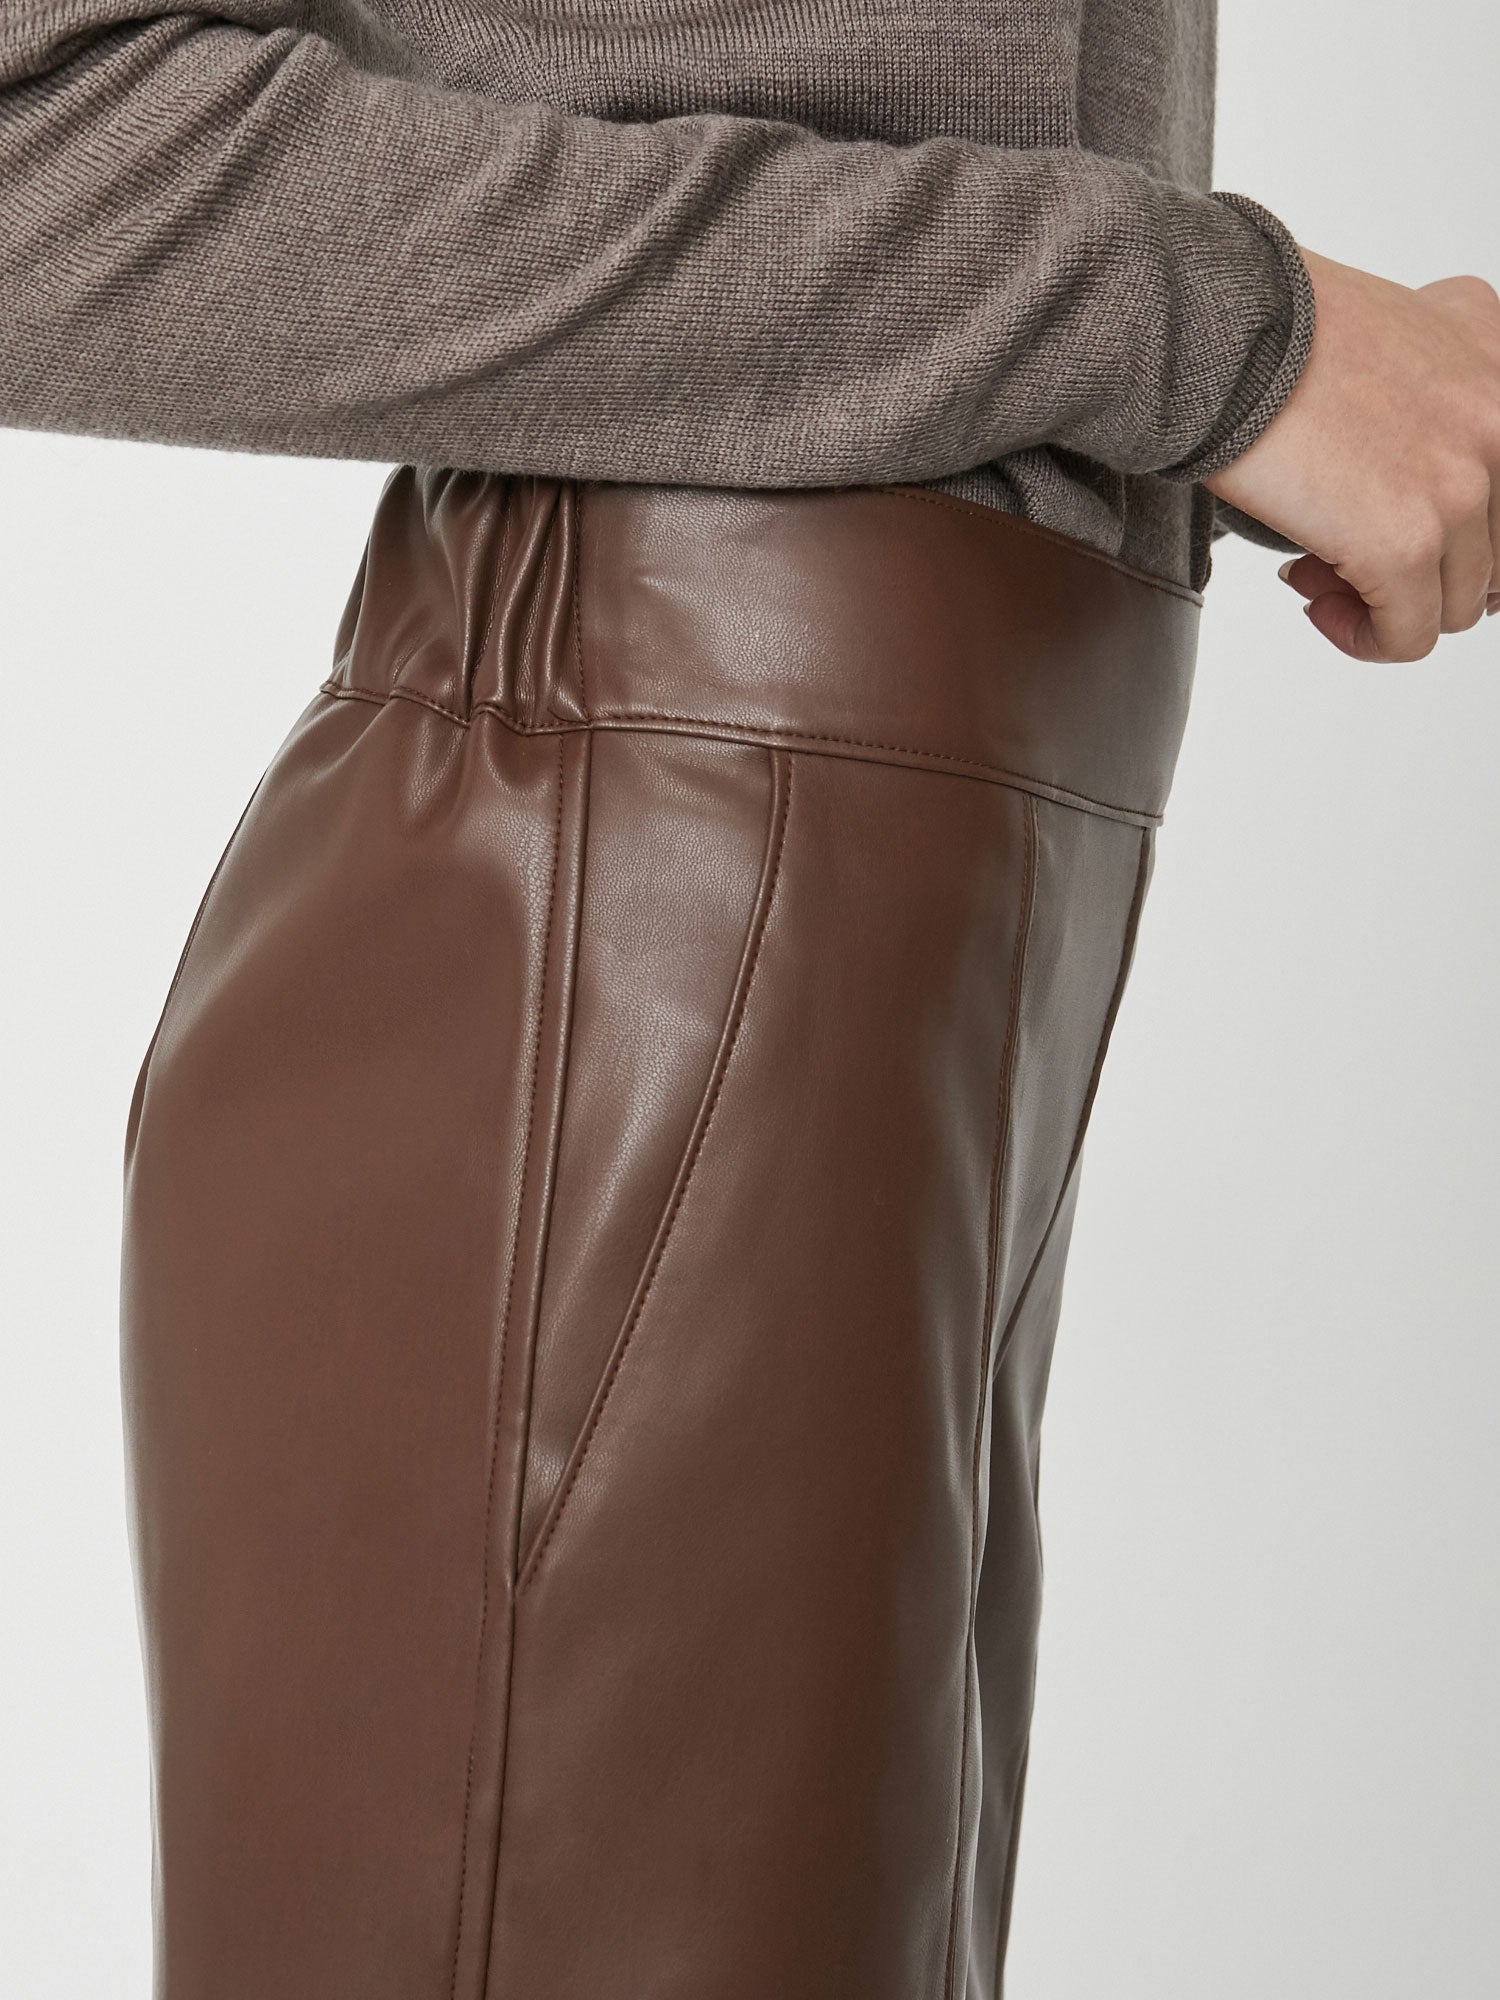 Zara Faux Leather Seamed Pants Size Small